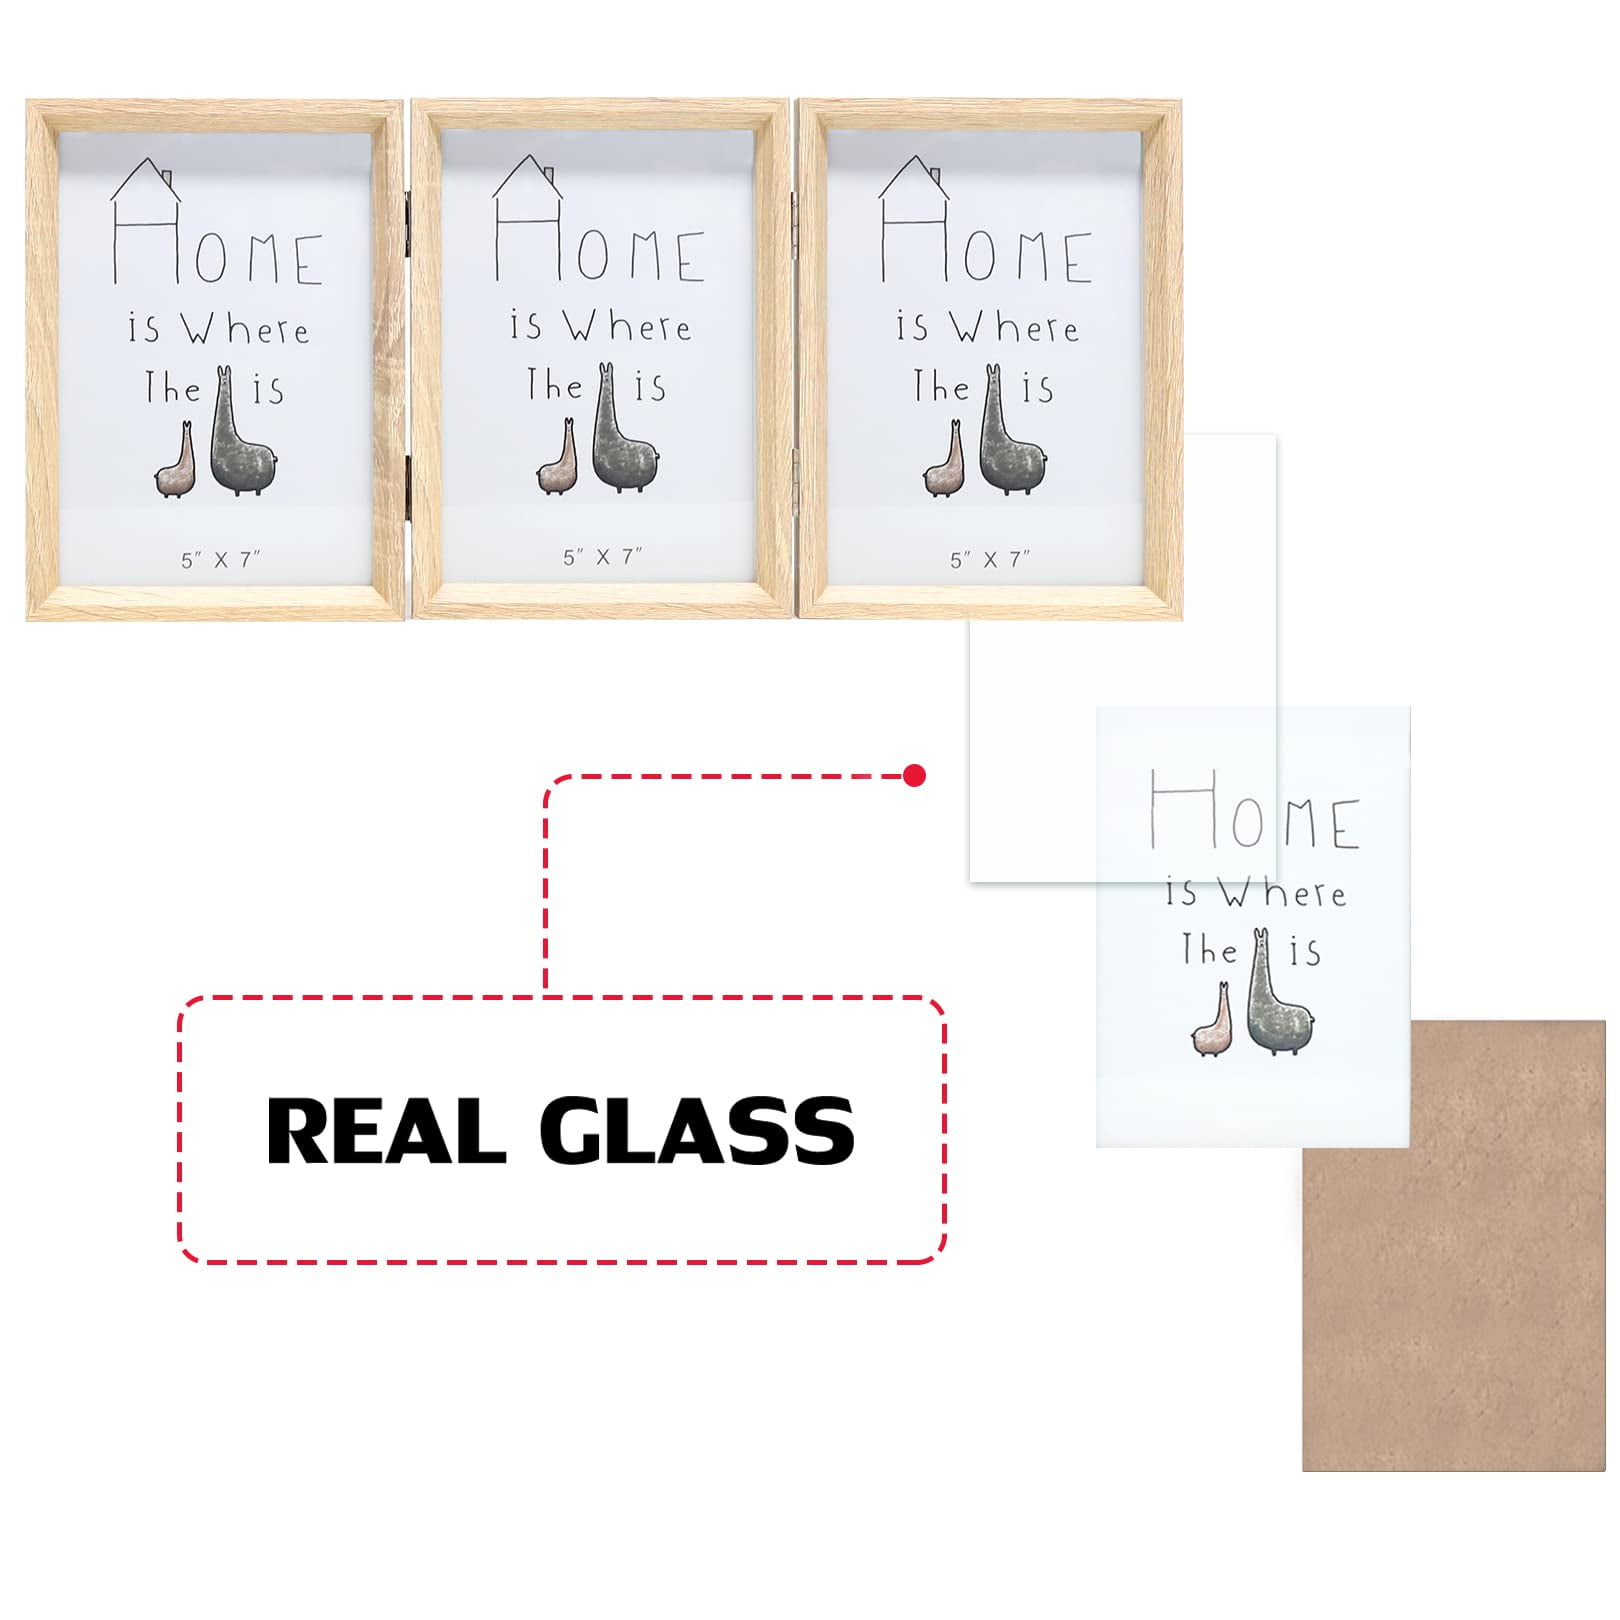 TOFOREVO Three Picture Frame 4x6 and 5x7 Wooden Hinged Folding Photo Frame Definition Glass Stand Vertically on Desktop or tabletop?gr